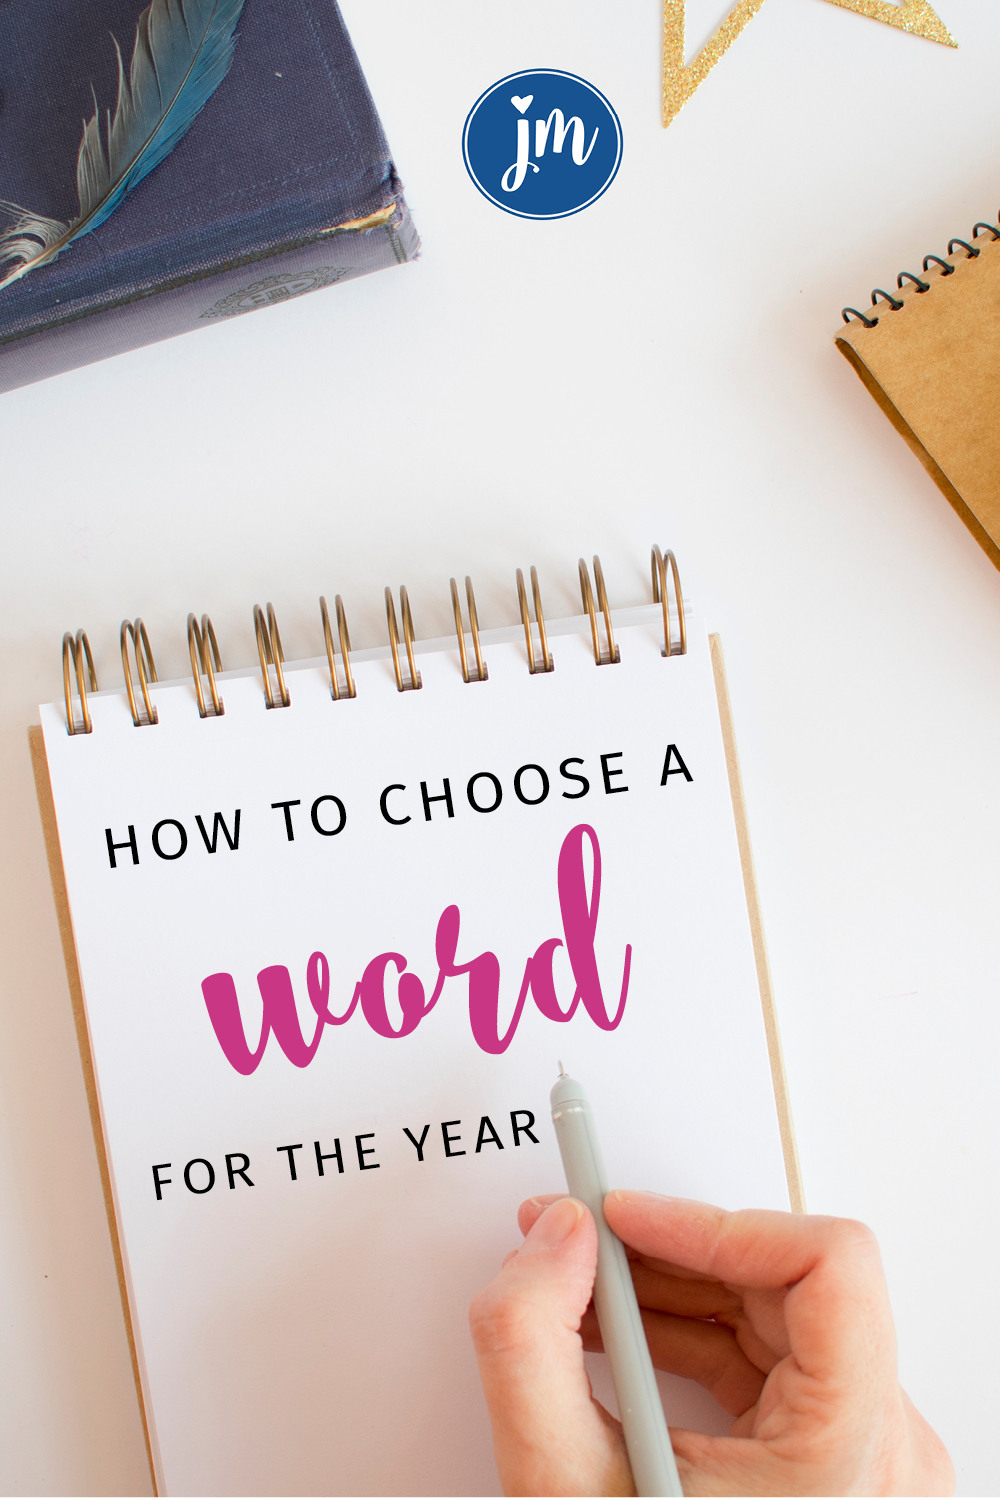 Want to choose a word of the year but don't know where to start? Here are some tips plus a secret that no one is going to tell you...but I will! #wordoftheyear